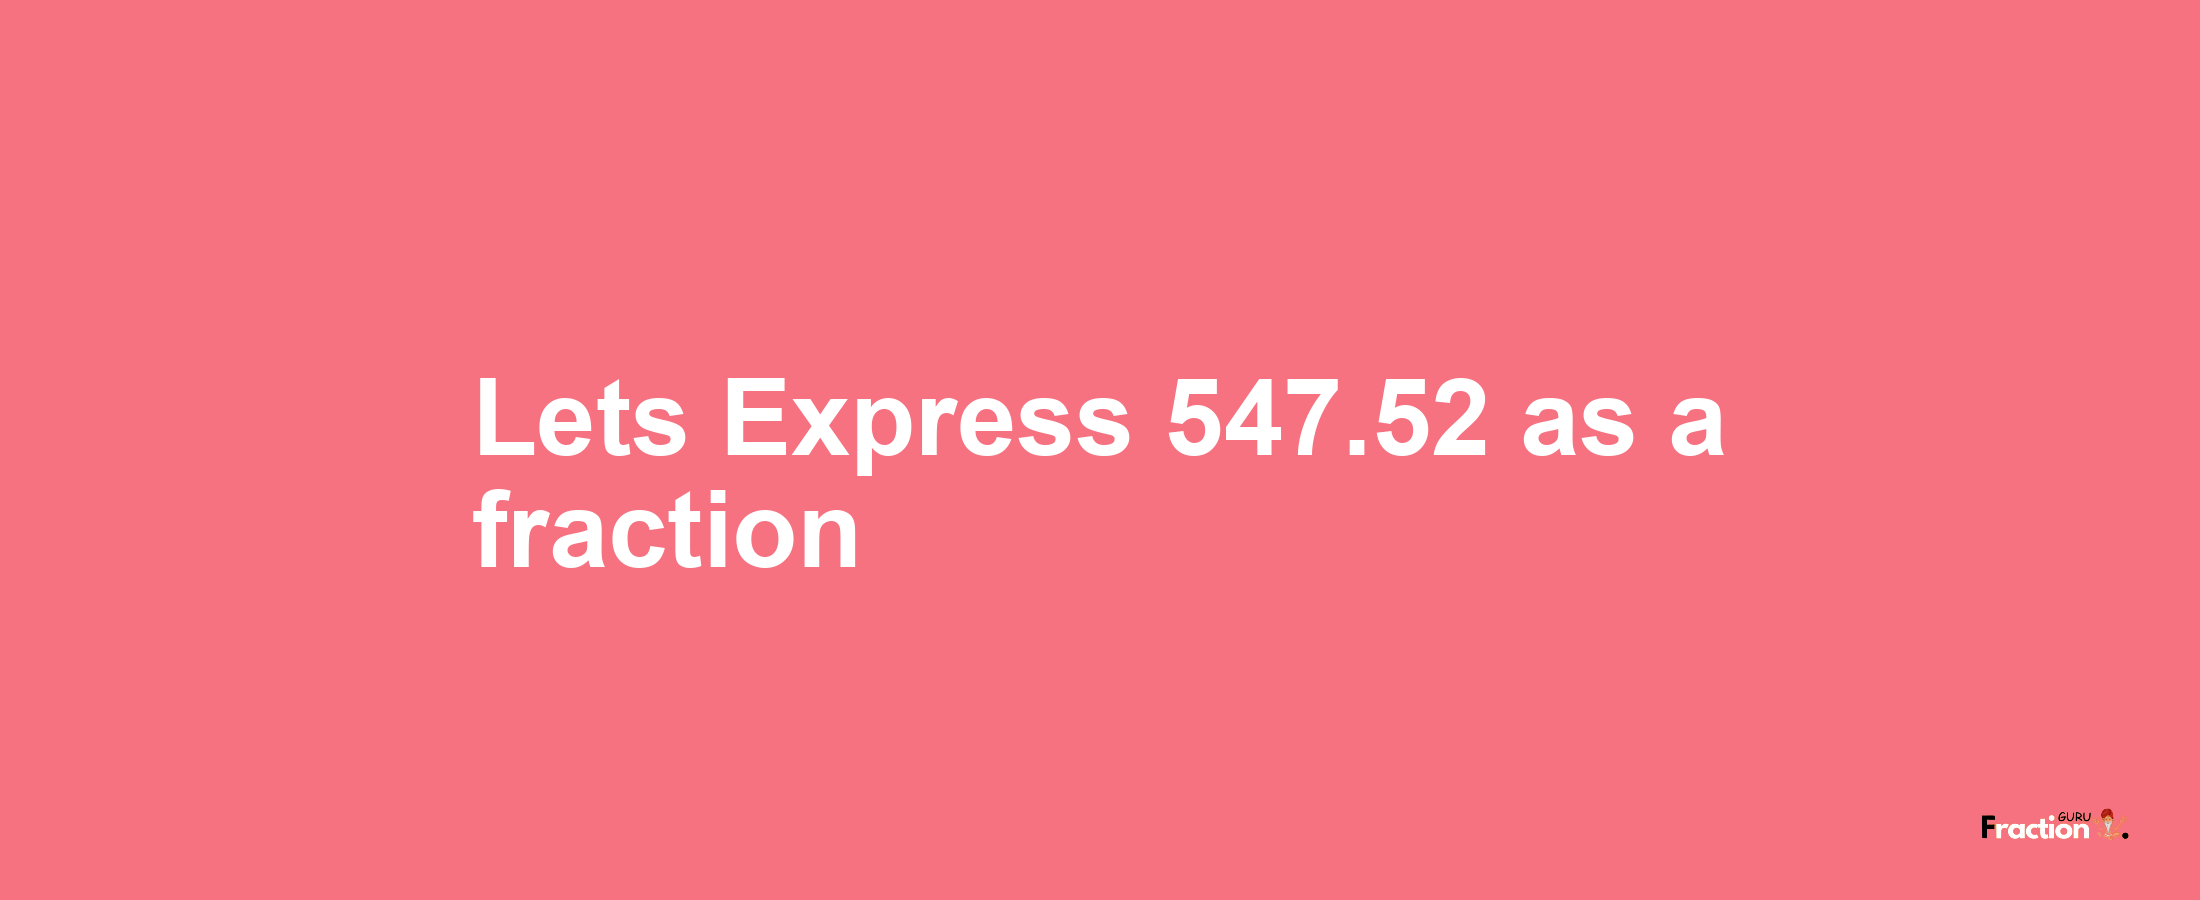 Lets Express 547.52 as afraction